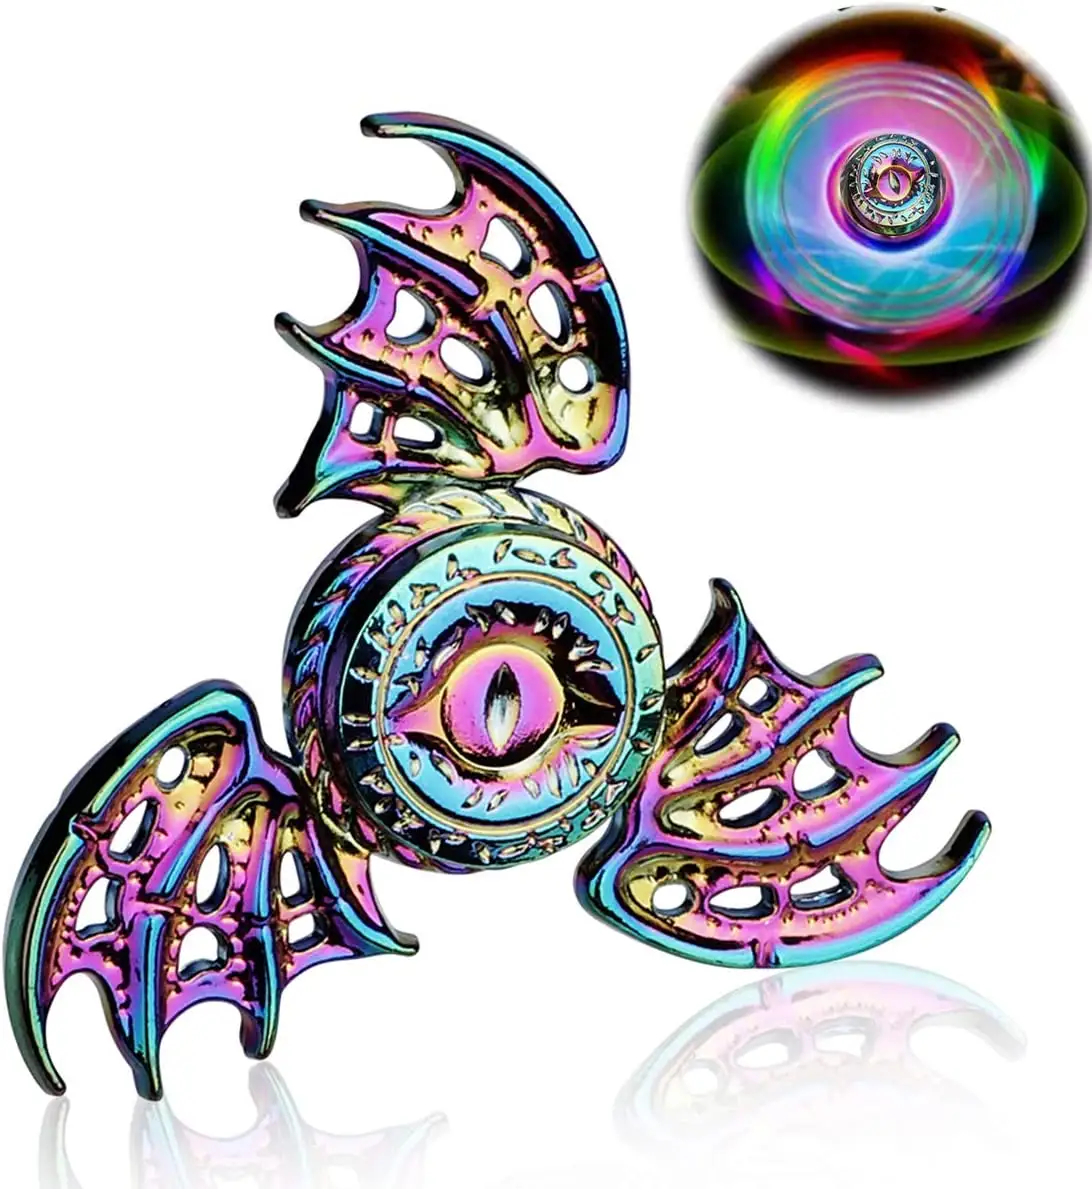 Dragon Wing Finger Spinner Metal Stainless Steel Fingertip Gyro Stress Relief Spiral Twister ADHD EDC Toy Fidget Hand Spinners